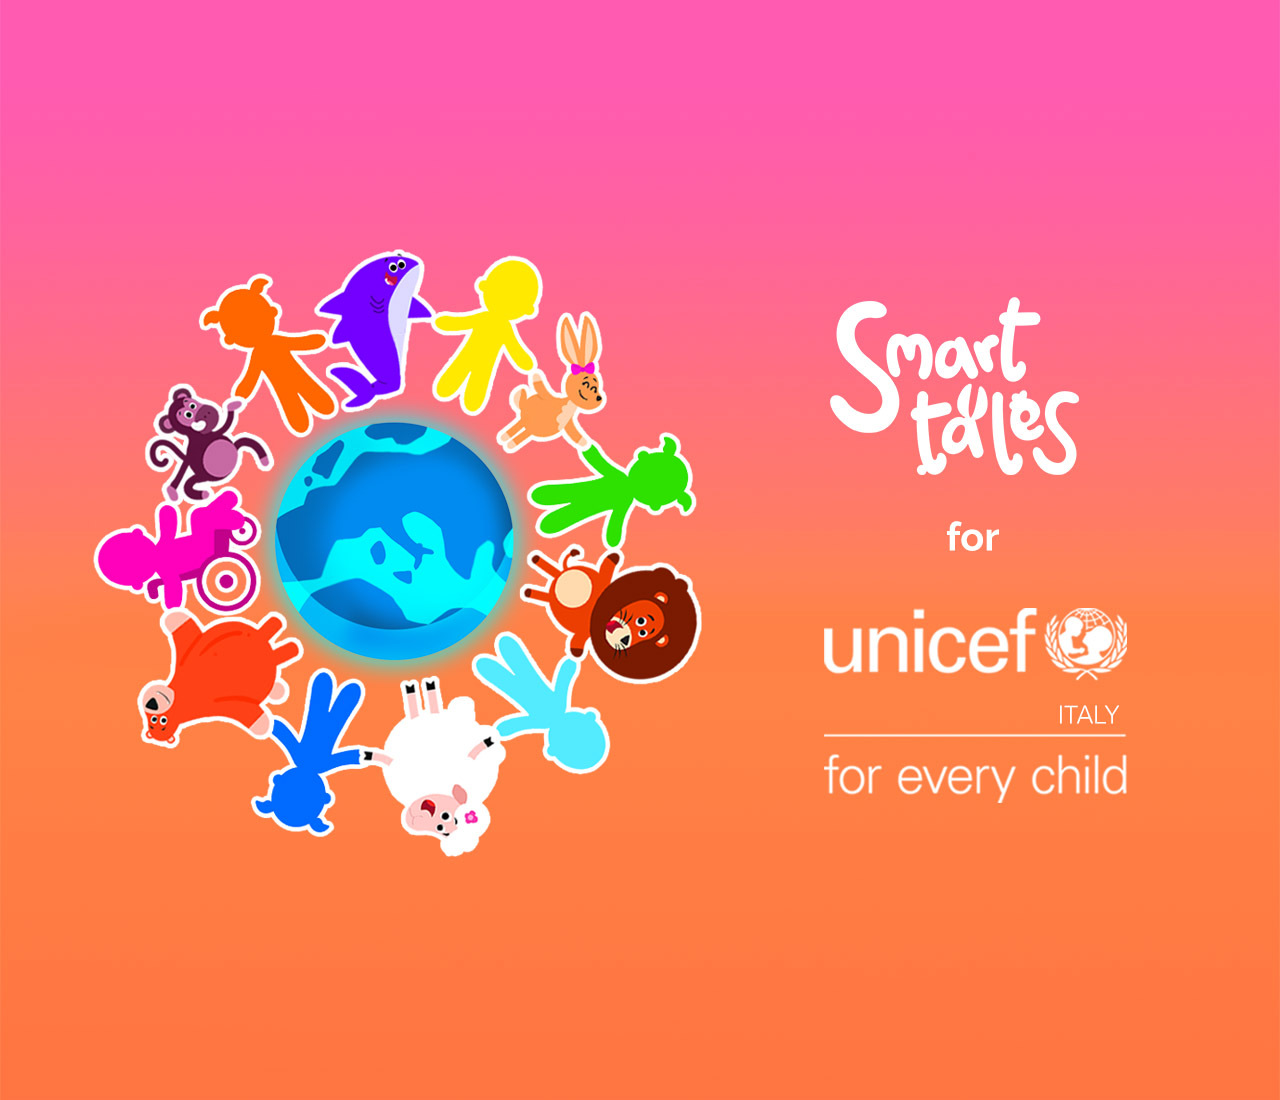 UNICEF and Smart Tales together for every child